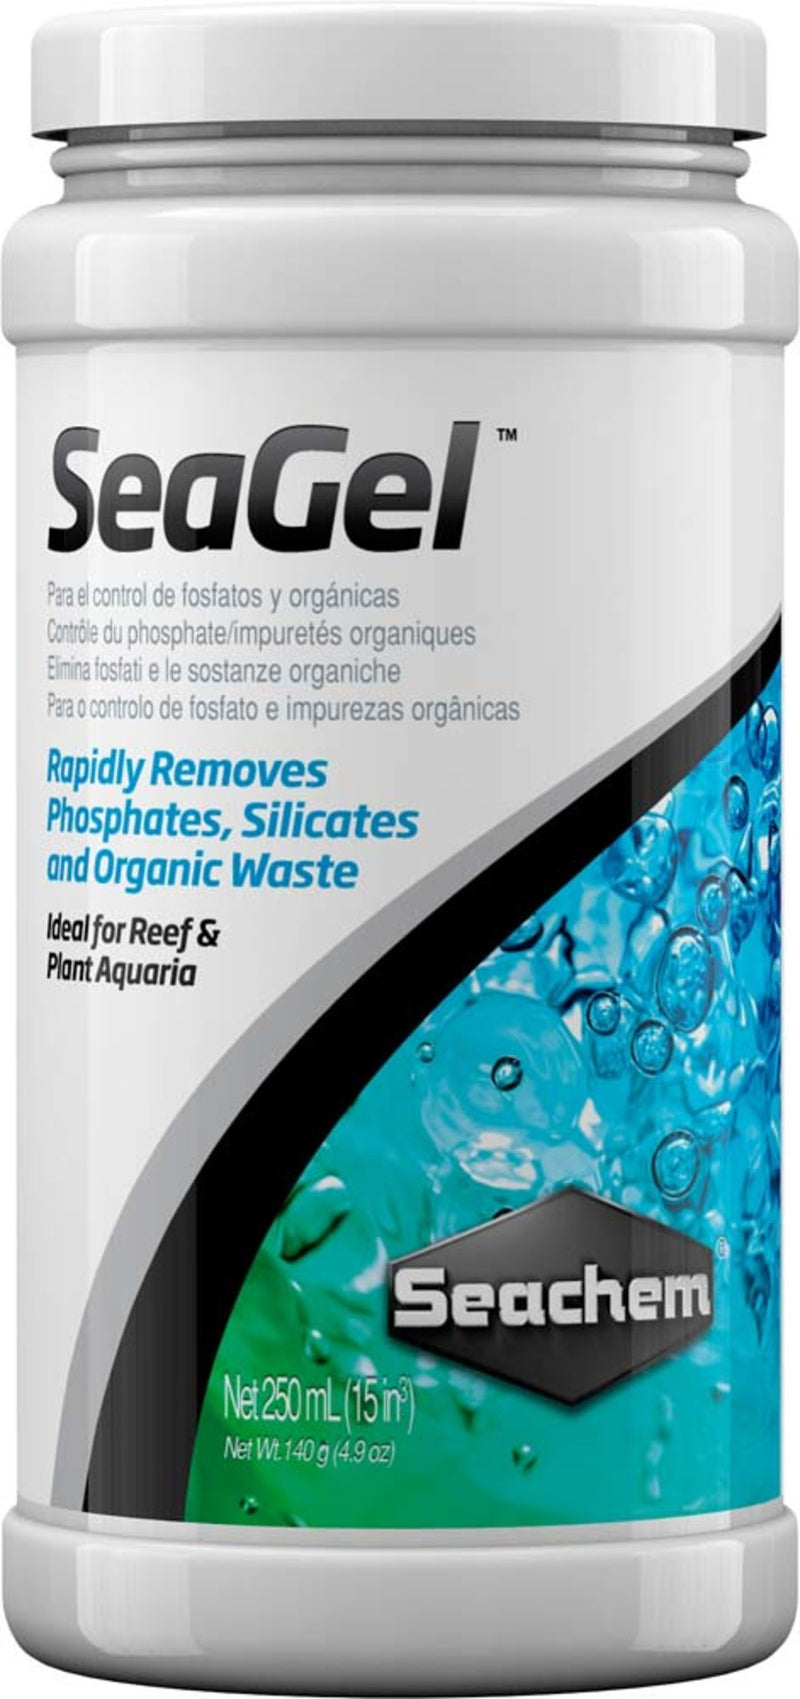 Seachem SeaGel Phosphate, Silicate, and Organic Waster Remover